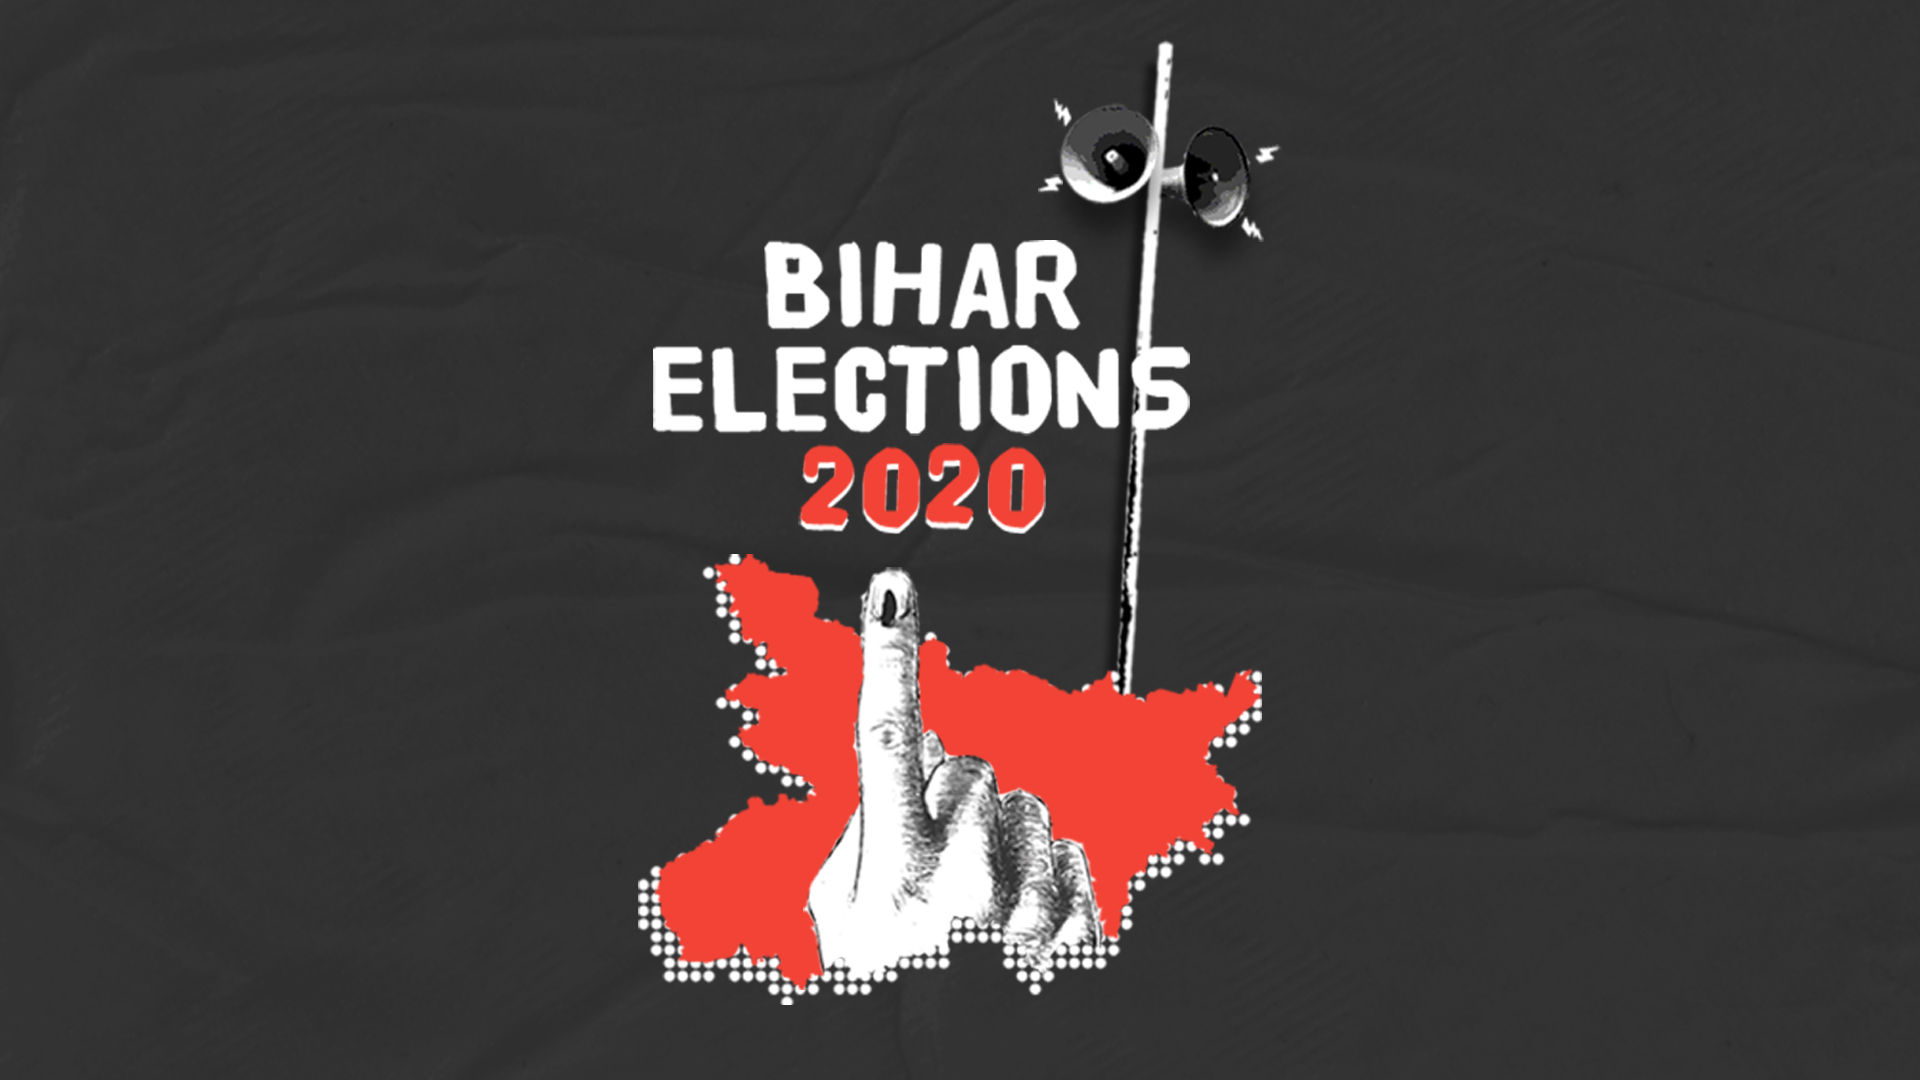 Madhubani%20Election%20Result%202020%20LIVE%3A%20Madhubani%20Assembly%20Constituency%20Results%2C%20MLA%20Elections%20Winner%20